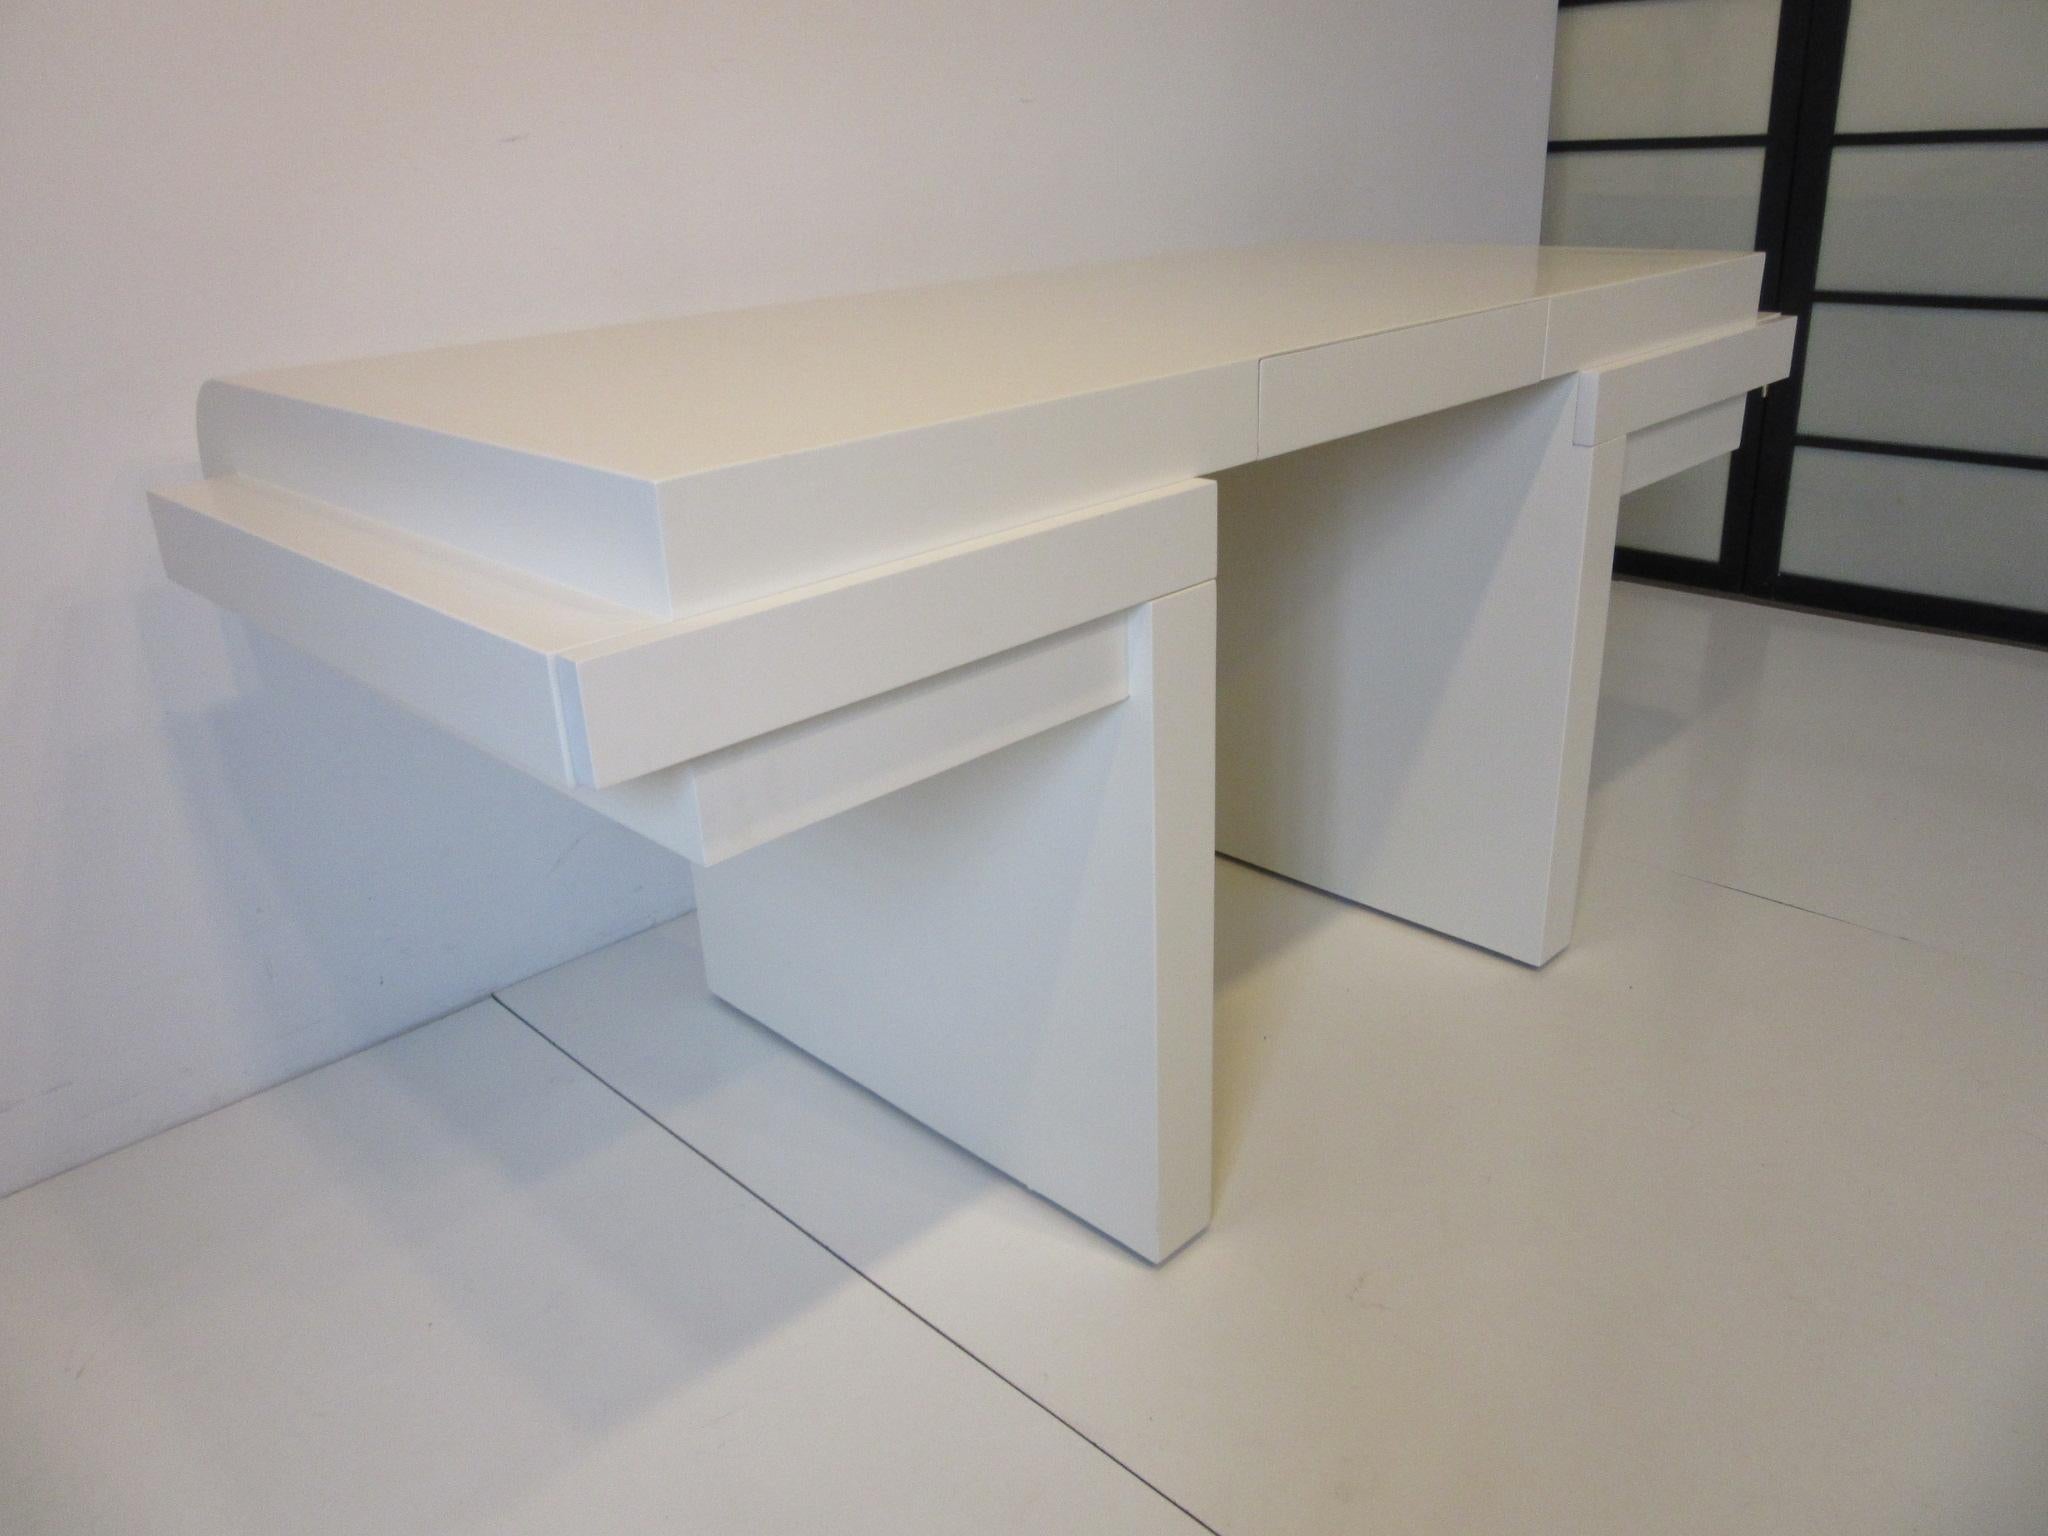 A light cream colored sculptural wood desk with pedestal base, rounded front and to the other side three small drawers. This desk makes a subtle simple statement but has a lot of design power making this the perfect piece for home or office, a well